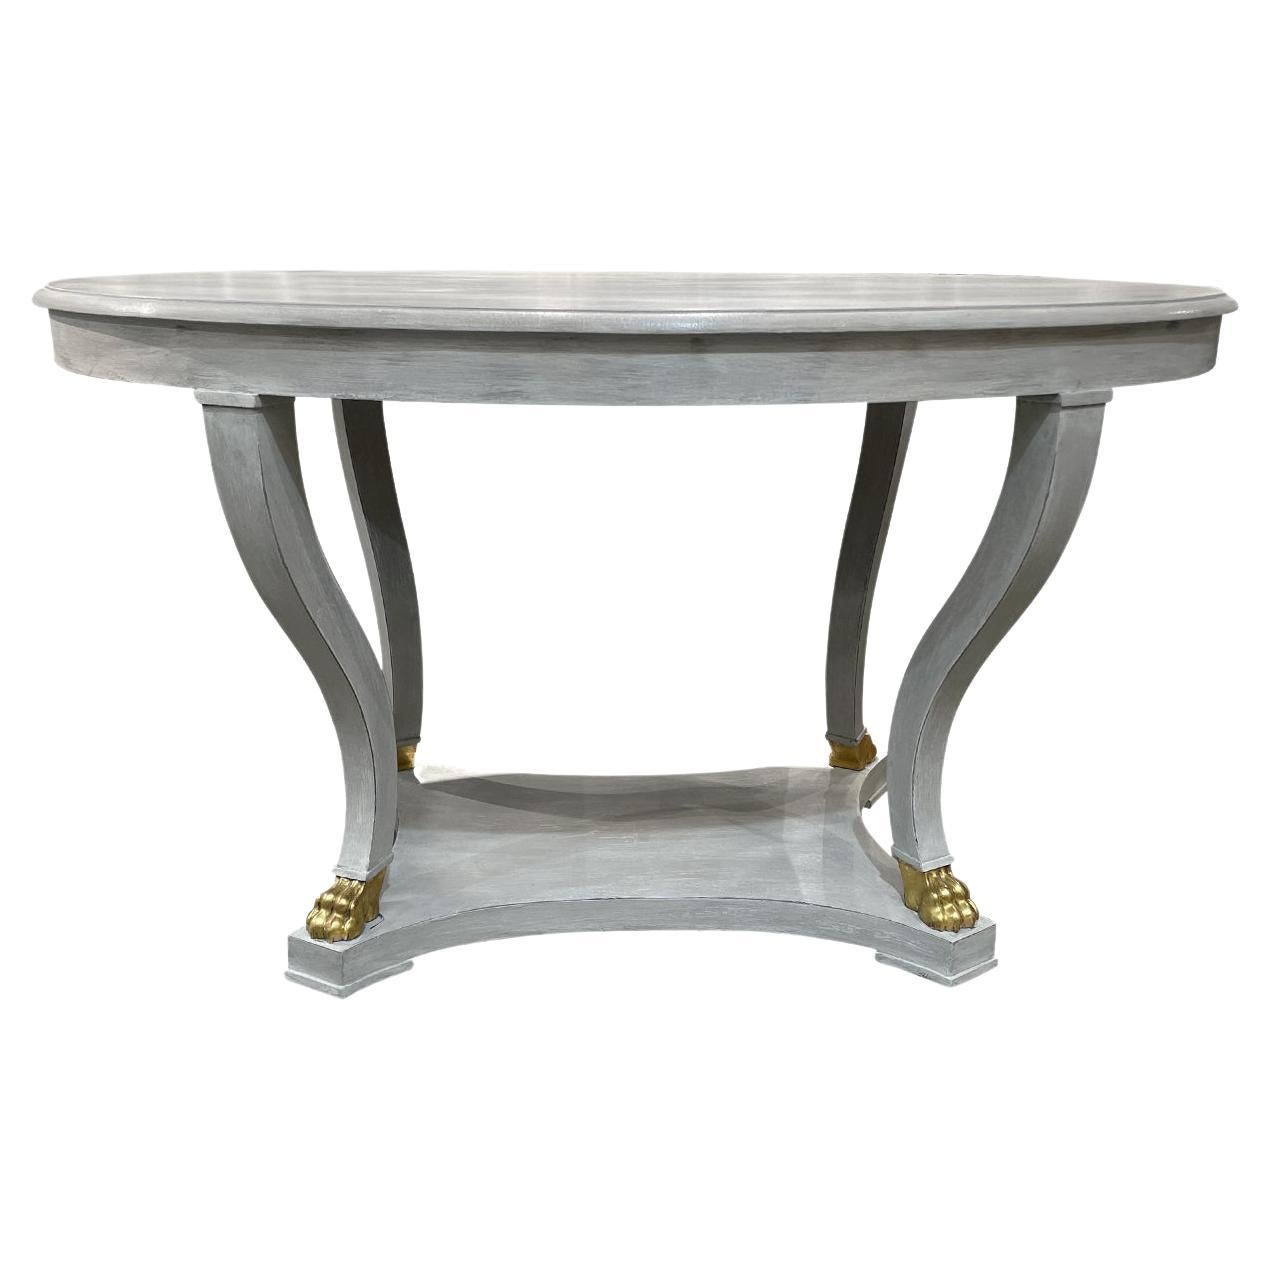 19th Century Light-Grey Swedish Gustavian Antique Oval Pine Dining Room Table For Sale